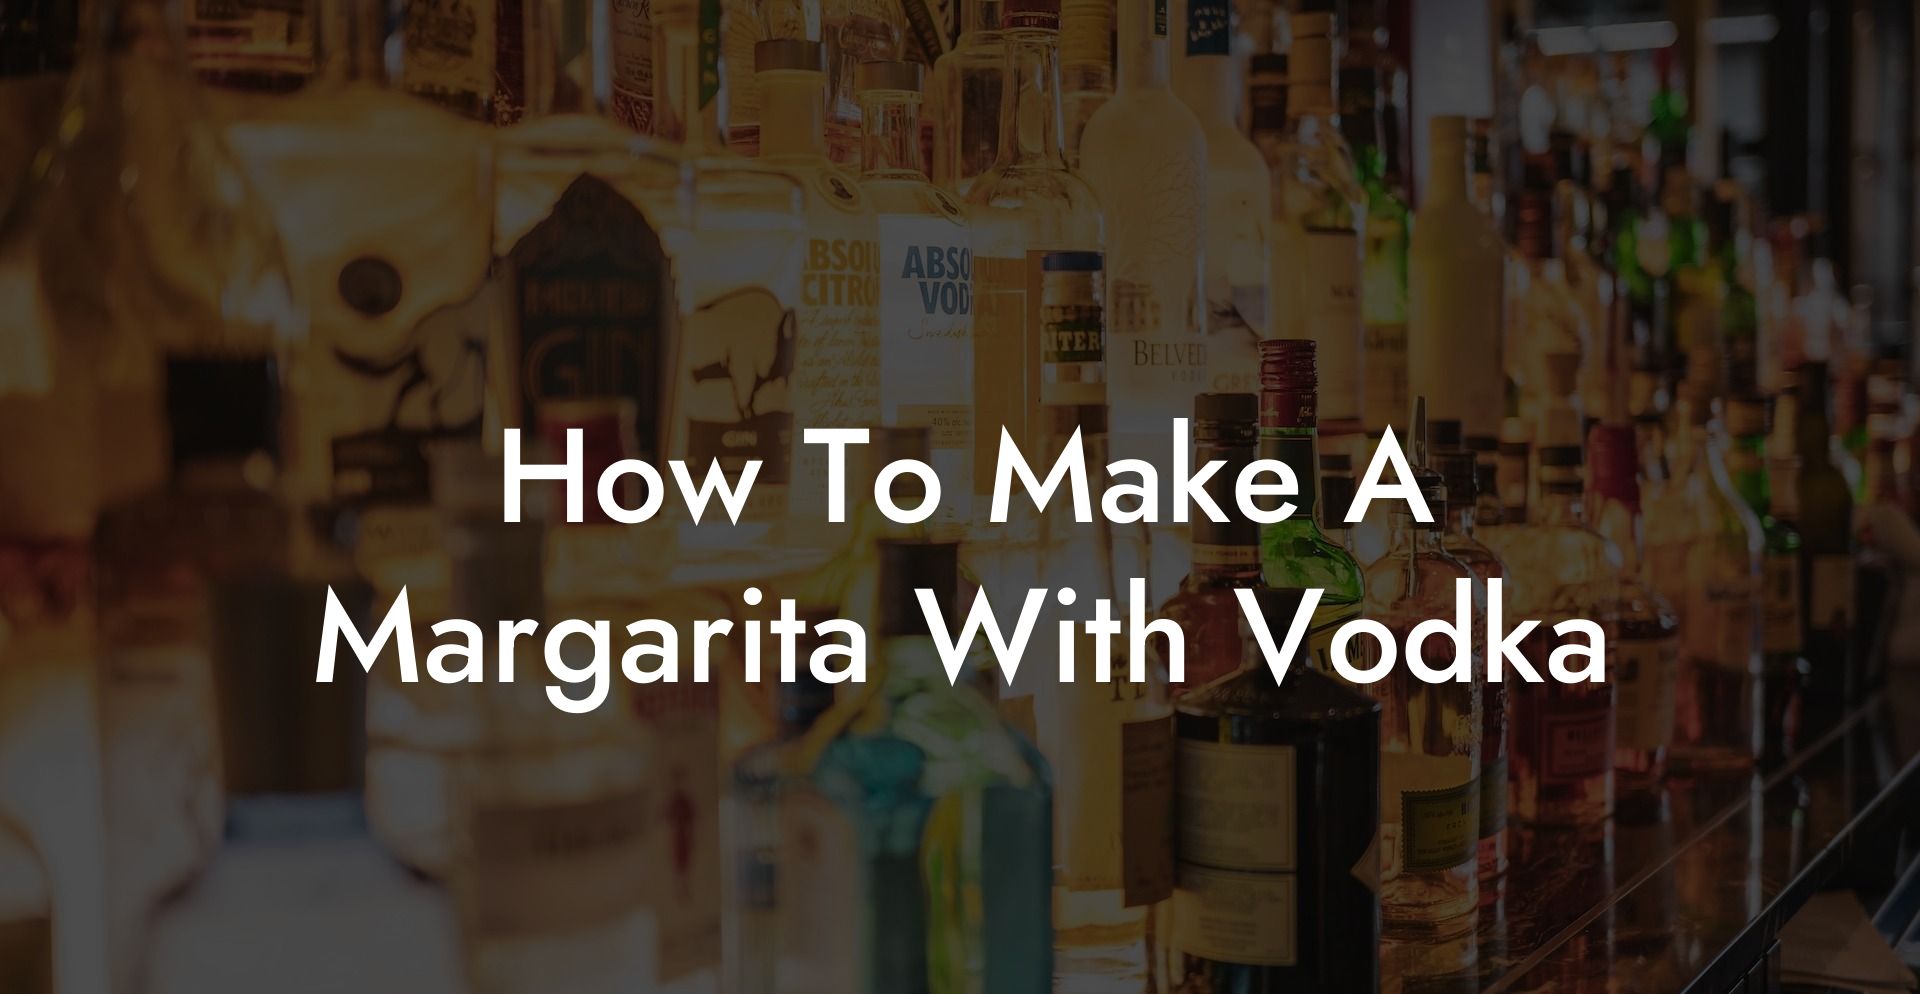 How To Make A Margarita With Vodka